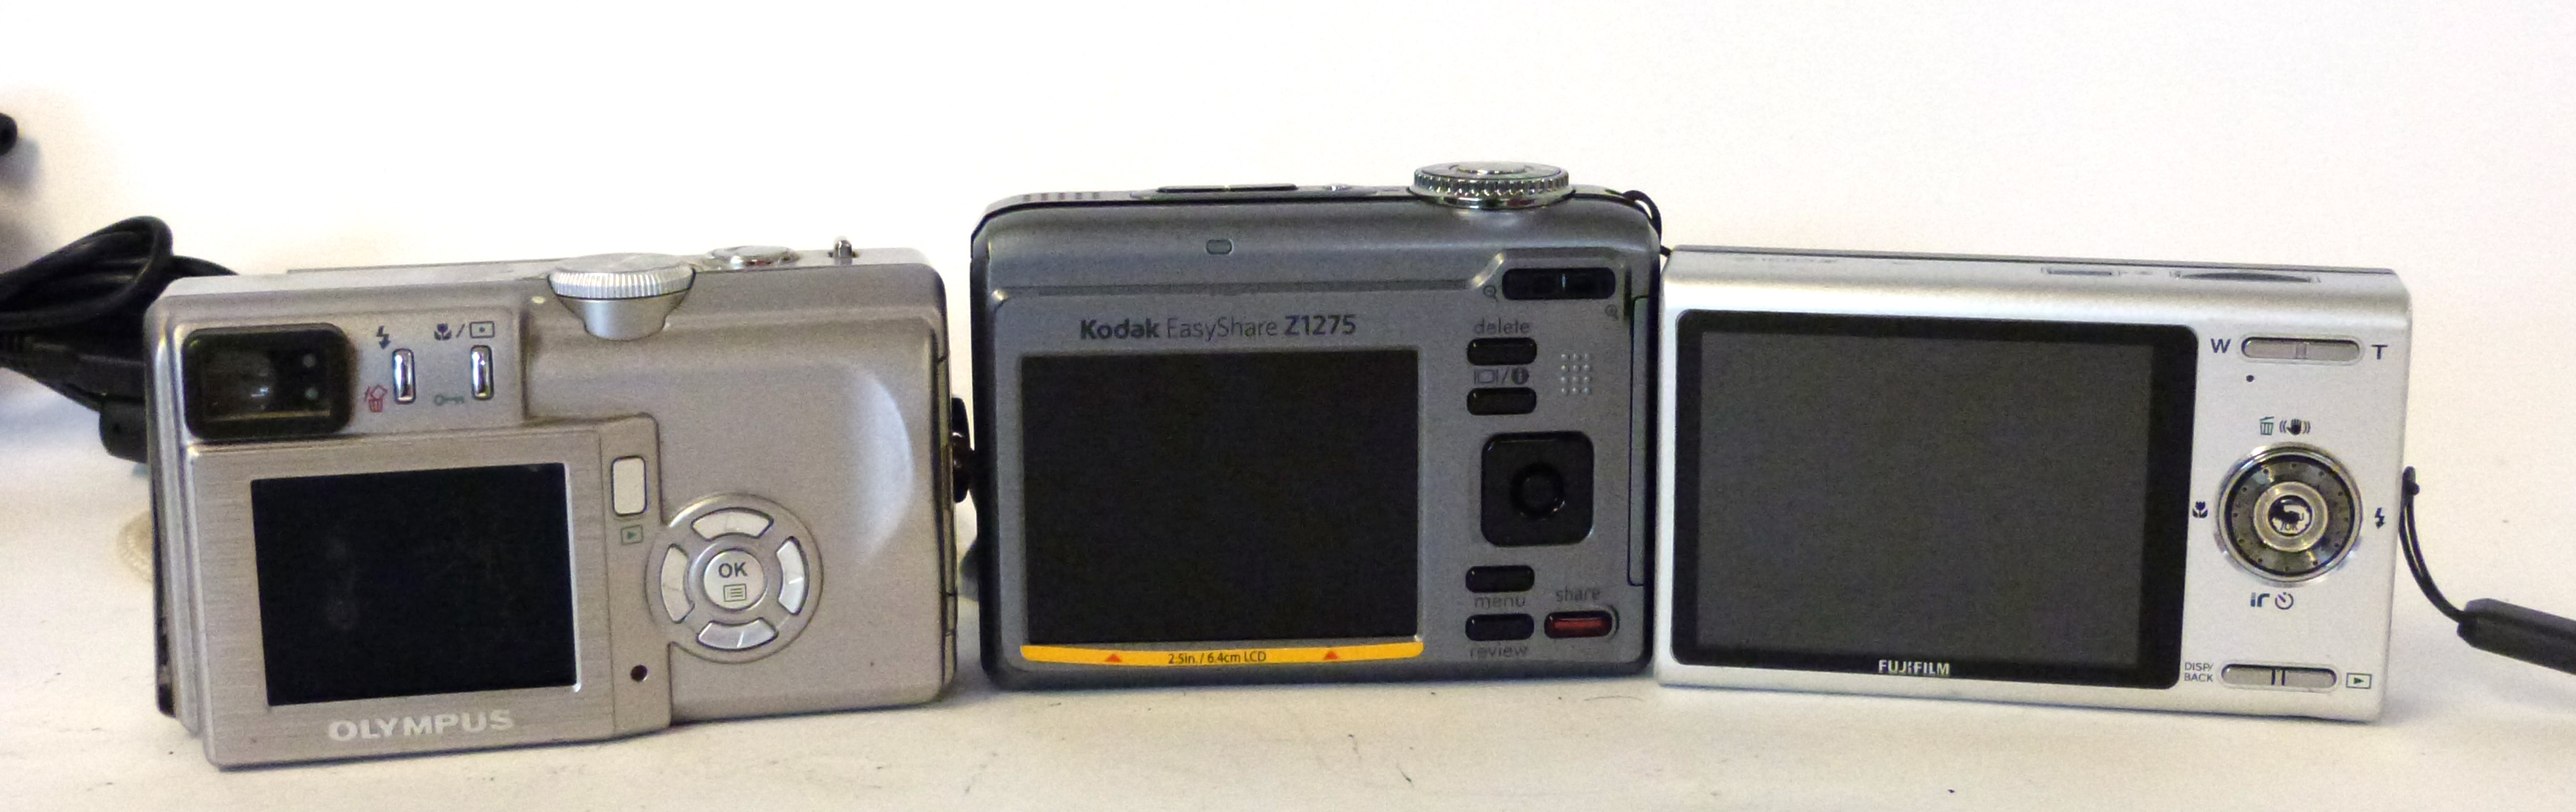 Mixed Lot: Fujifilm Finepix Z100 FD, a Kodad Easyshare 21275 and an Olympus Camedia C-60 - Image 4 of 4